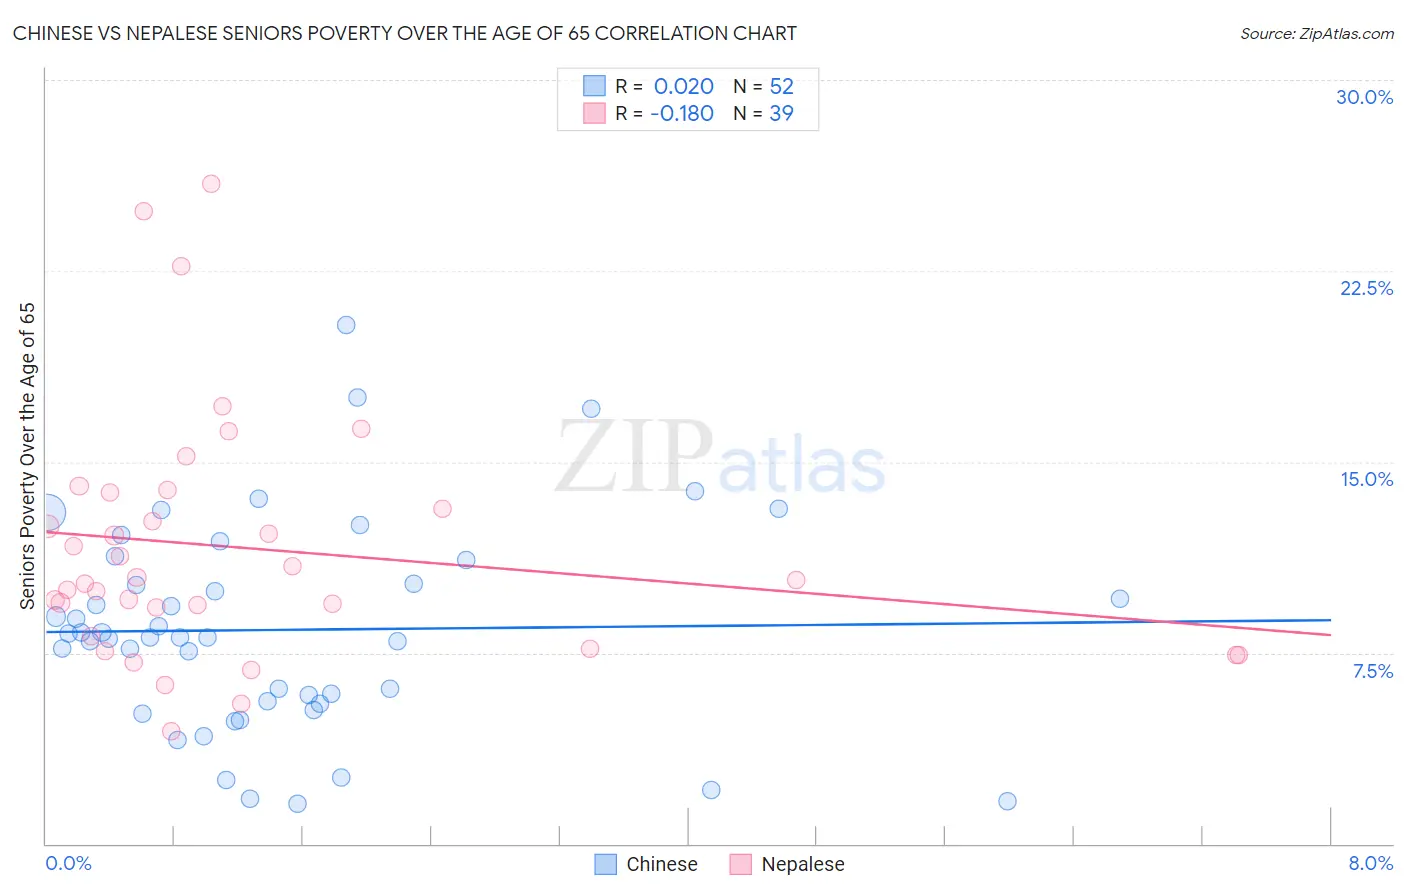 Chinese vs Nepalese Seniors Poverty Over the Age of 65